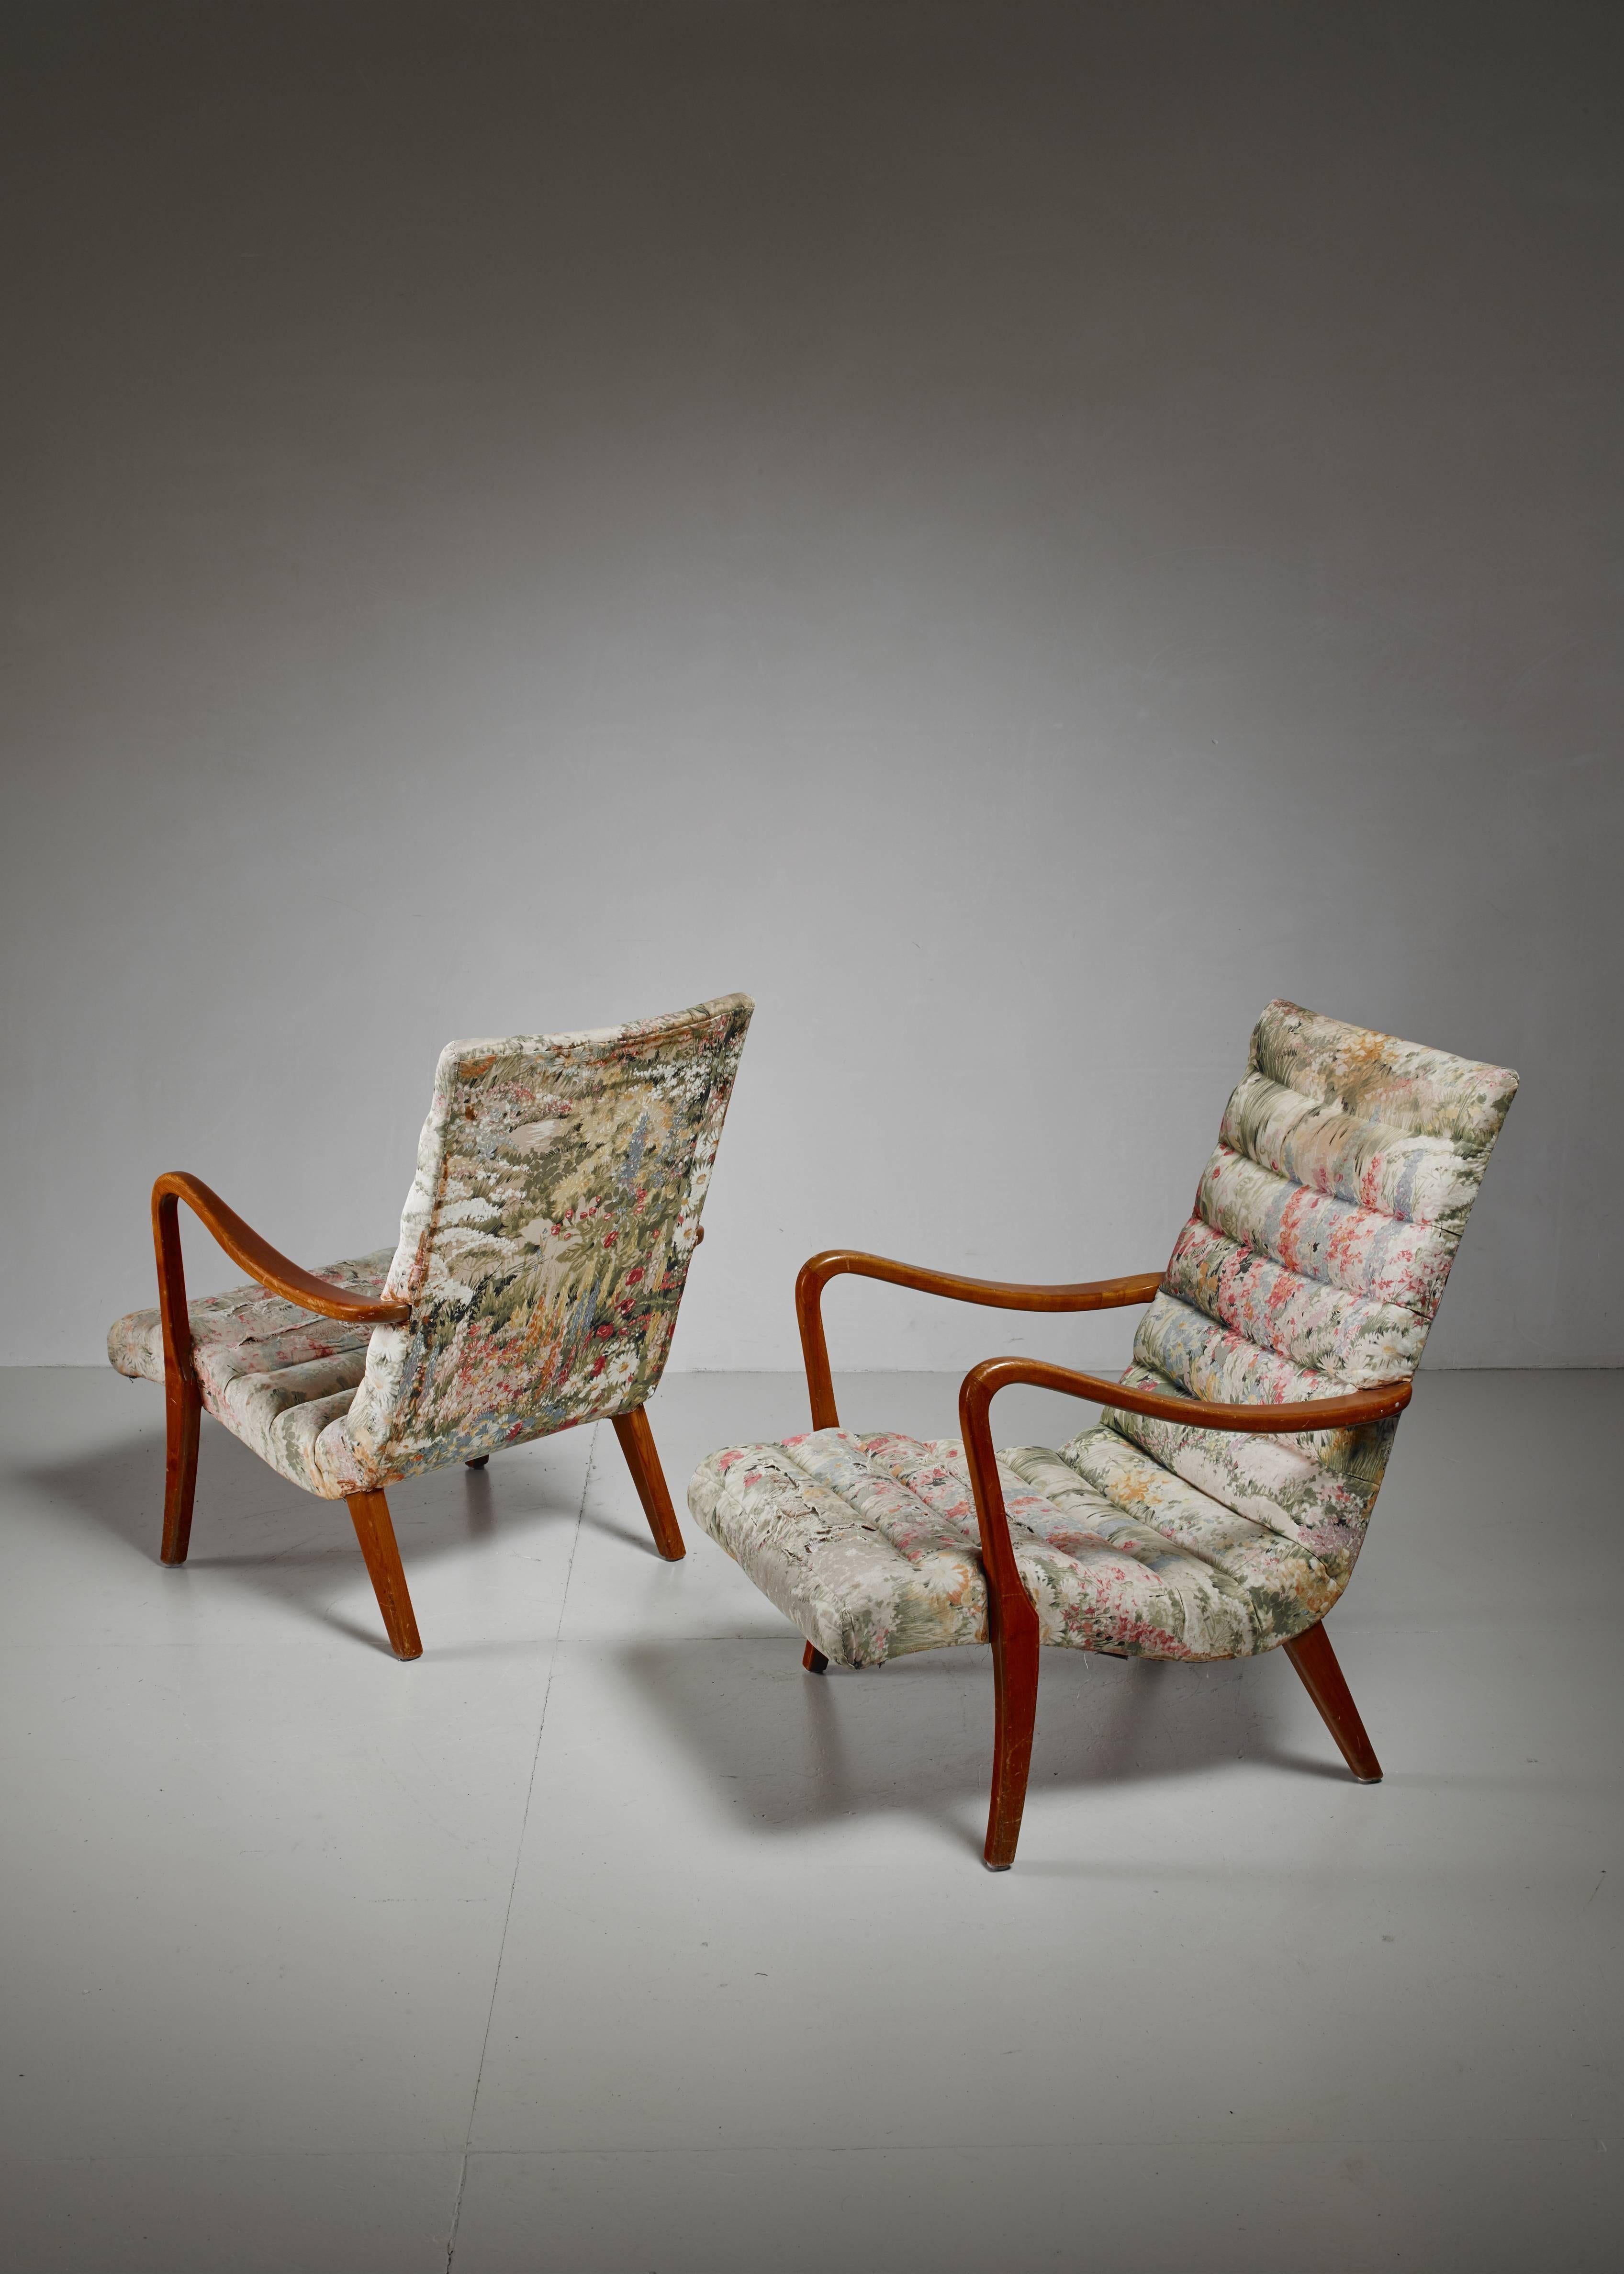 Swedish Pair of Axel Larsson Lounge Chairs, Bodafors, Sweden, 1940s For Sale